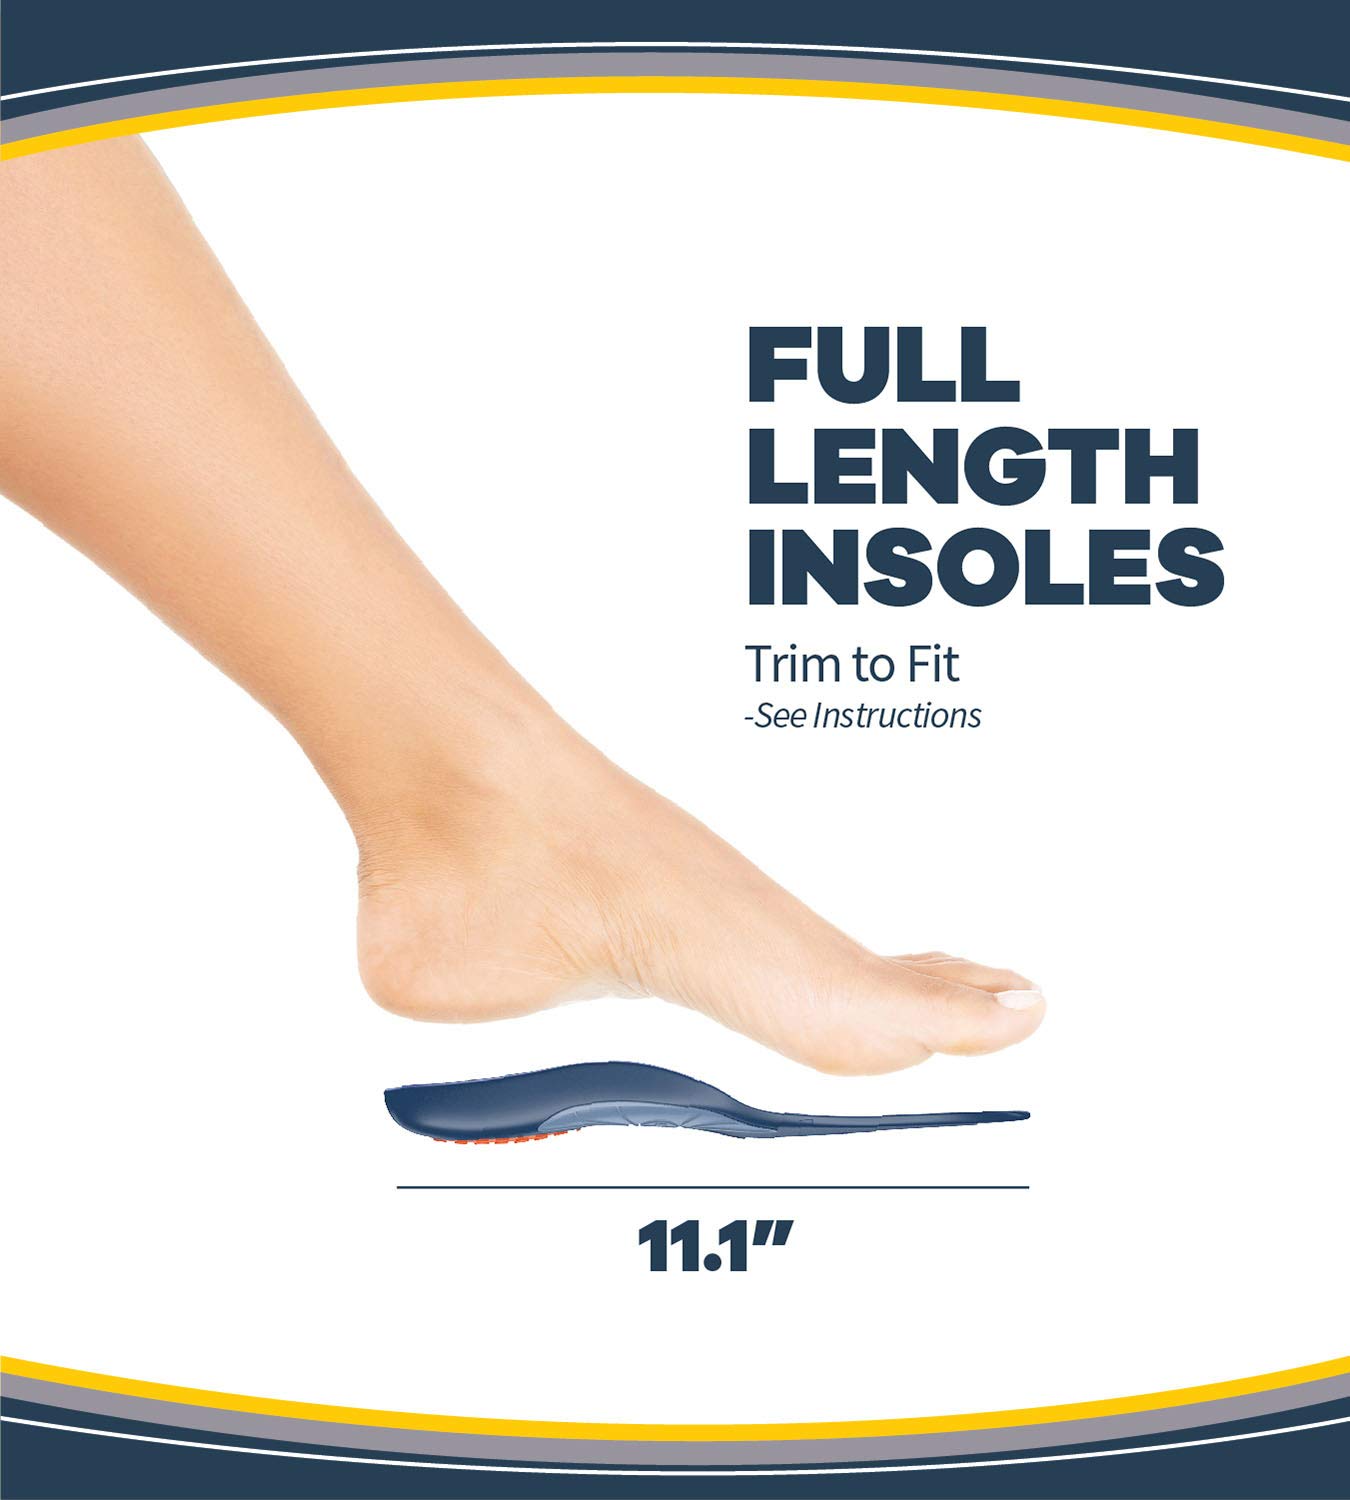 Dr. Scholl's Knee Pain Relief Orthotics // Immediate and All-Day Knee Pain Relief Including Pain from Runner’s Knee (for Women's 5.5-9, Also Available for Men's 8-14)